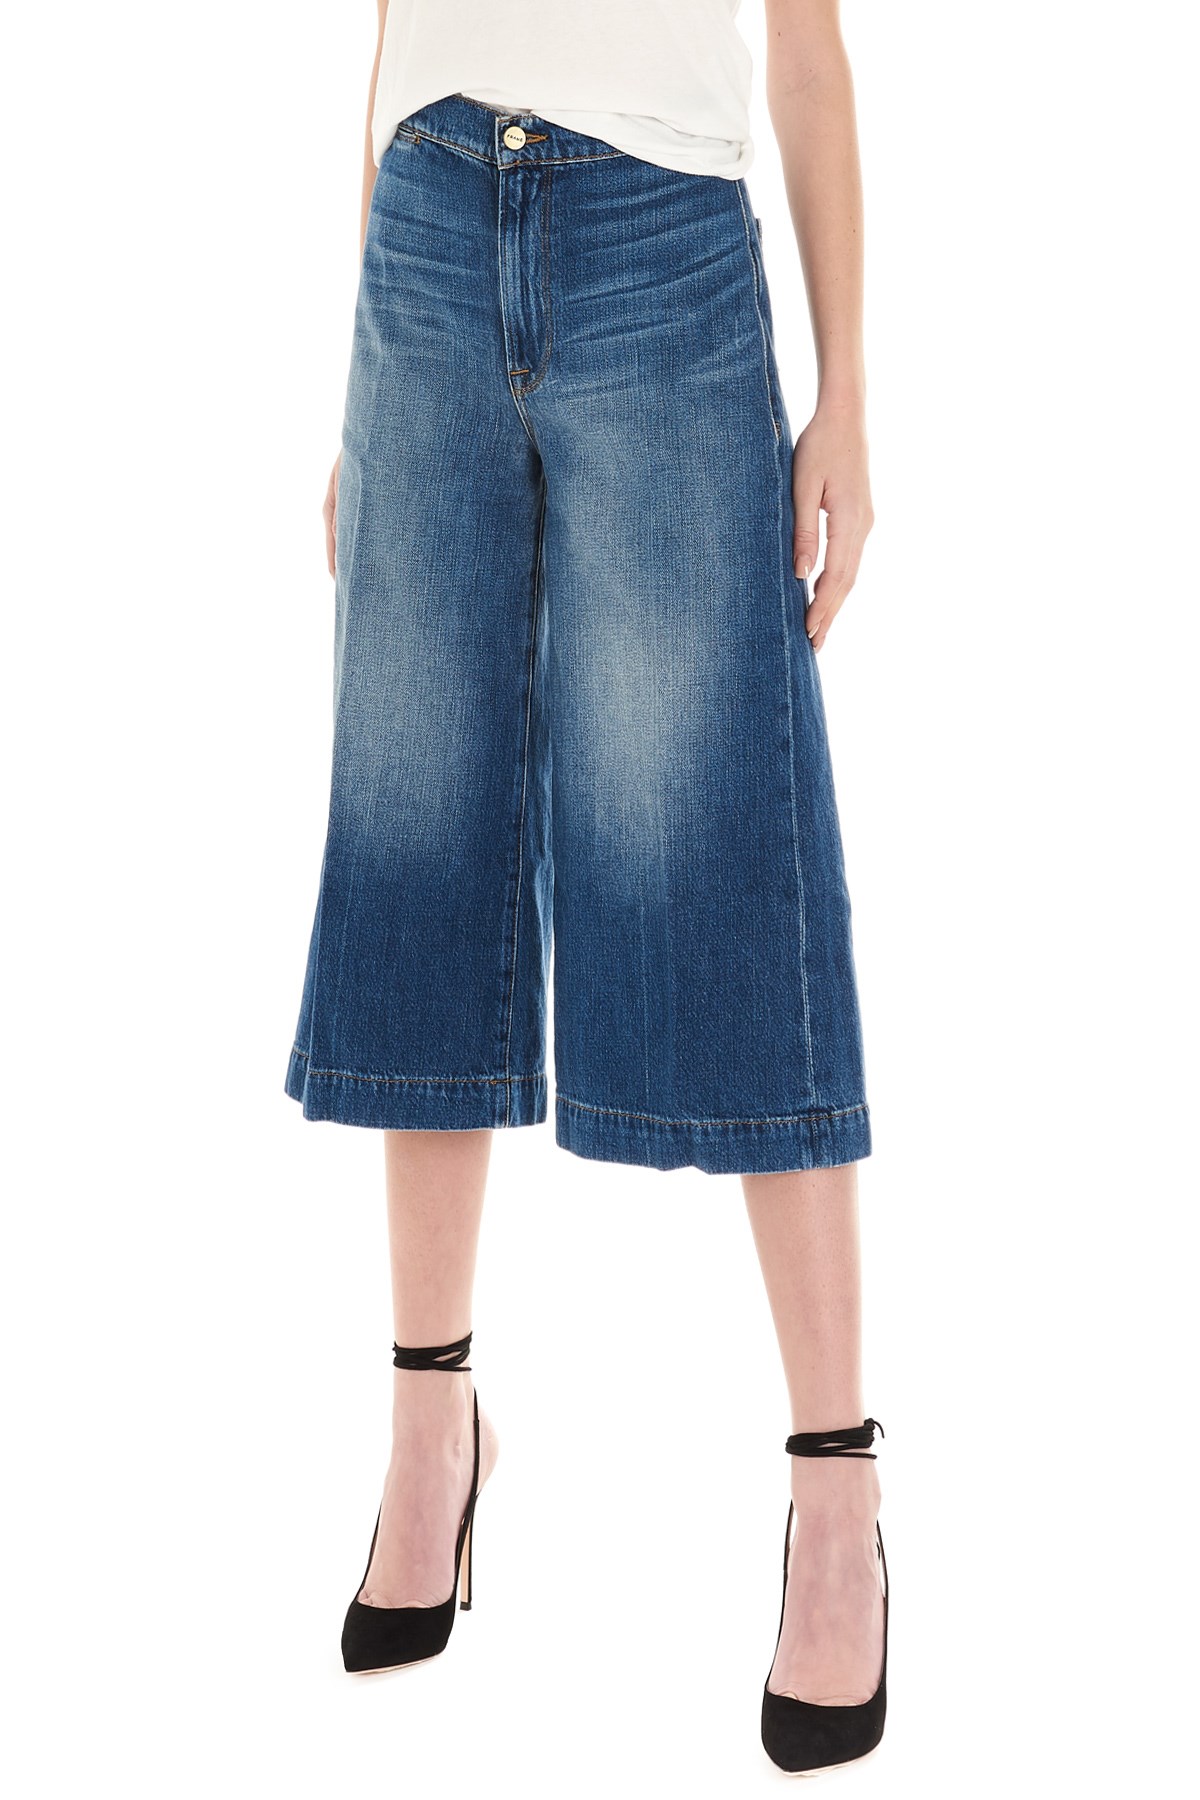 FRAME 'Le Coulotte' Cropped Jeans